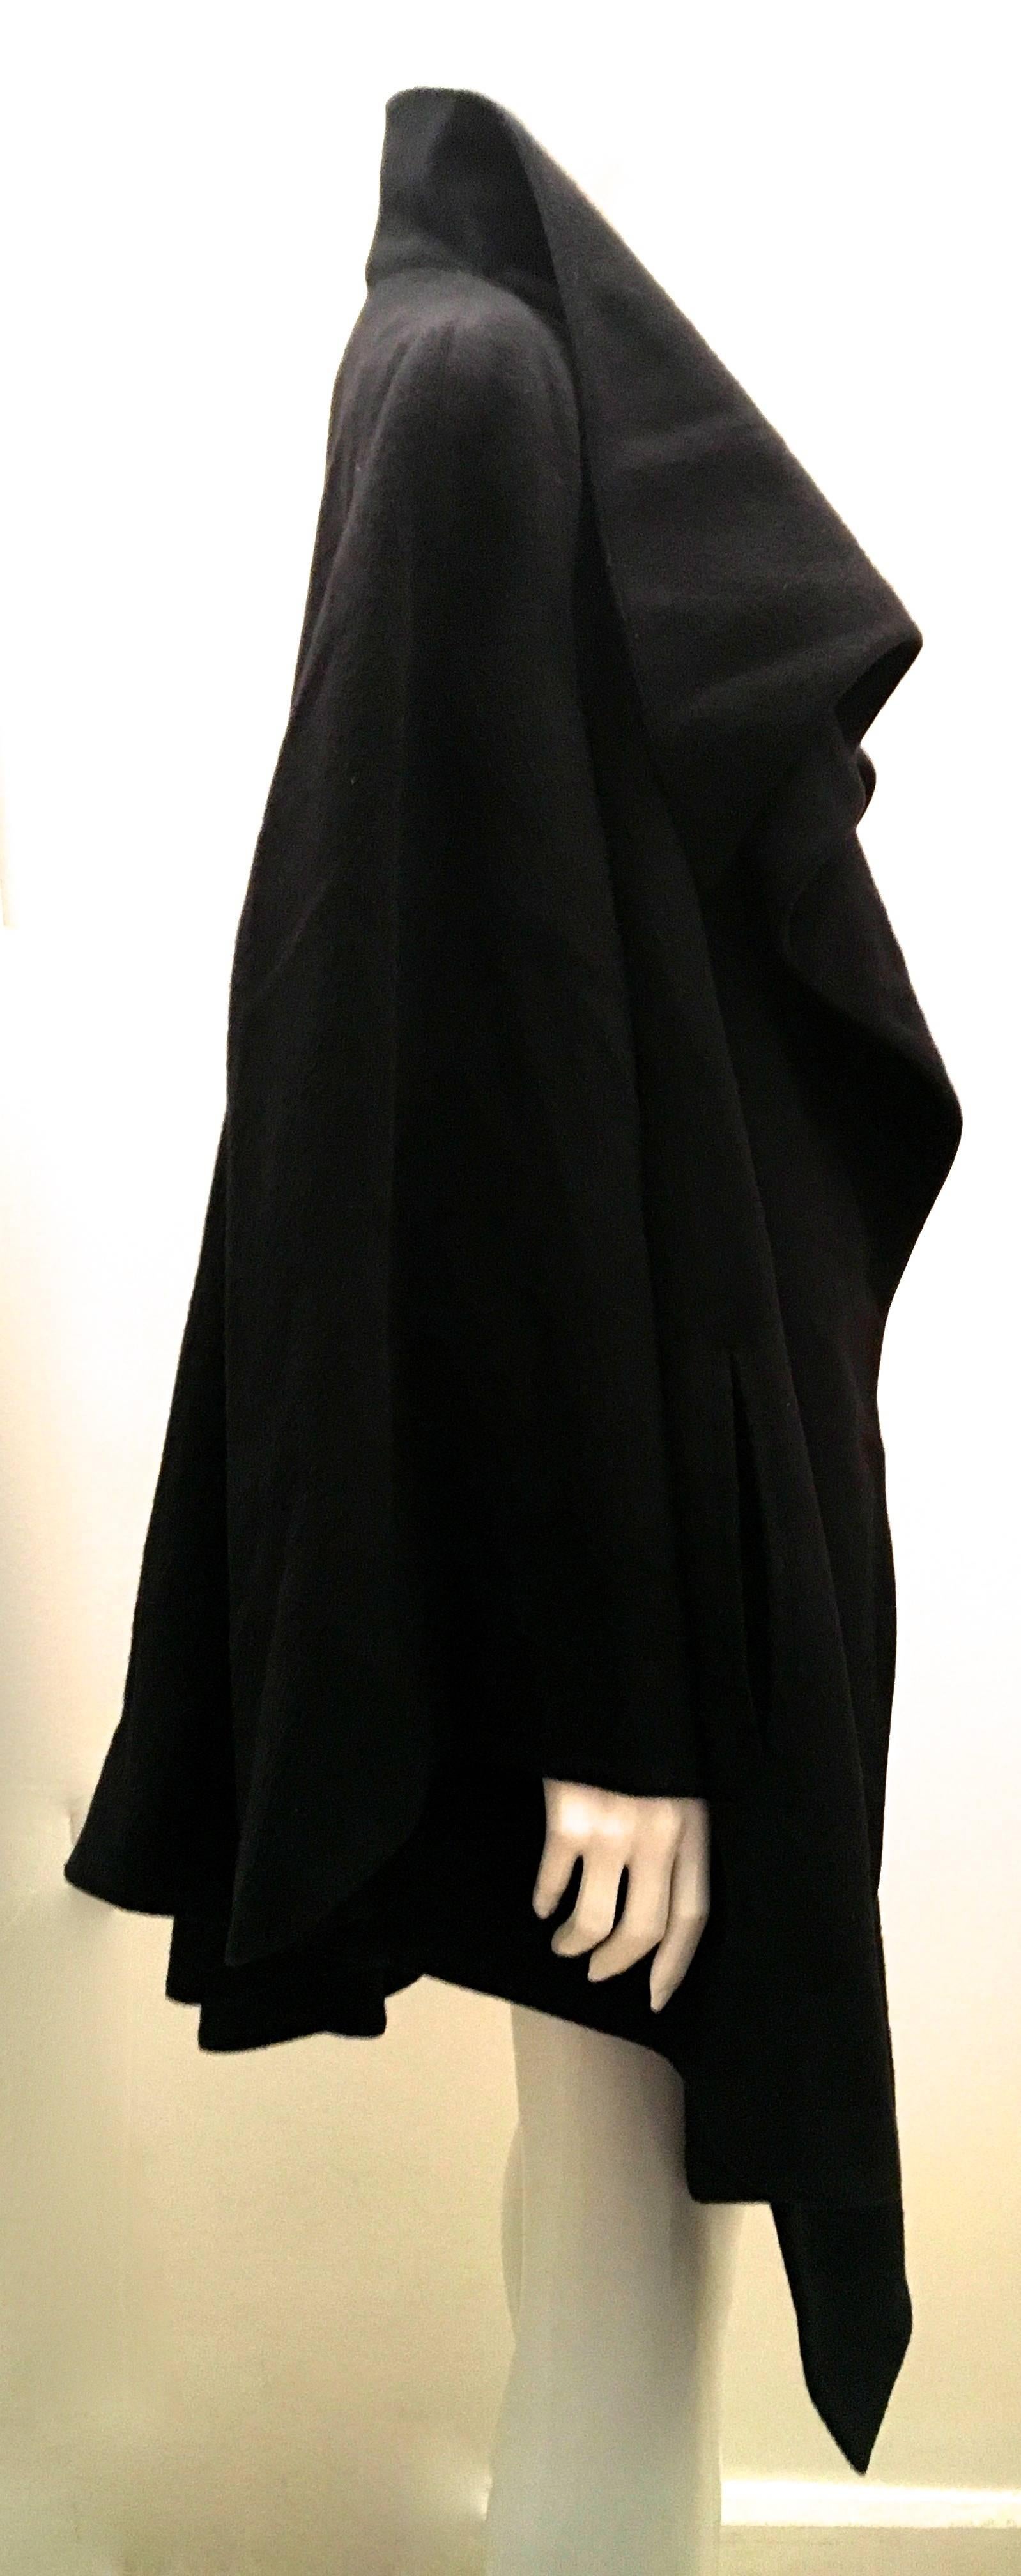 Presented here is a fabulous Claude Montana swing coat. The coat is from the 1990's and is in excellent condition. The coat is comprised of soft black wool throughout the exterior of the coat. The inside is completely lined with a black soft blend